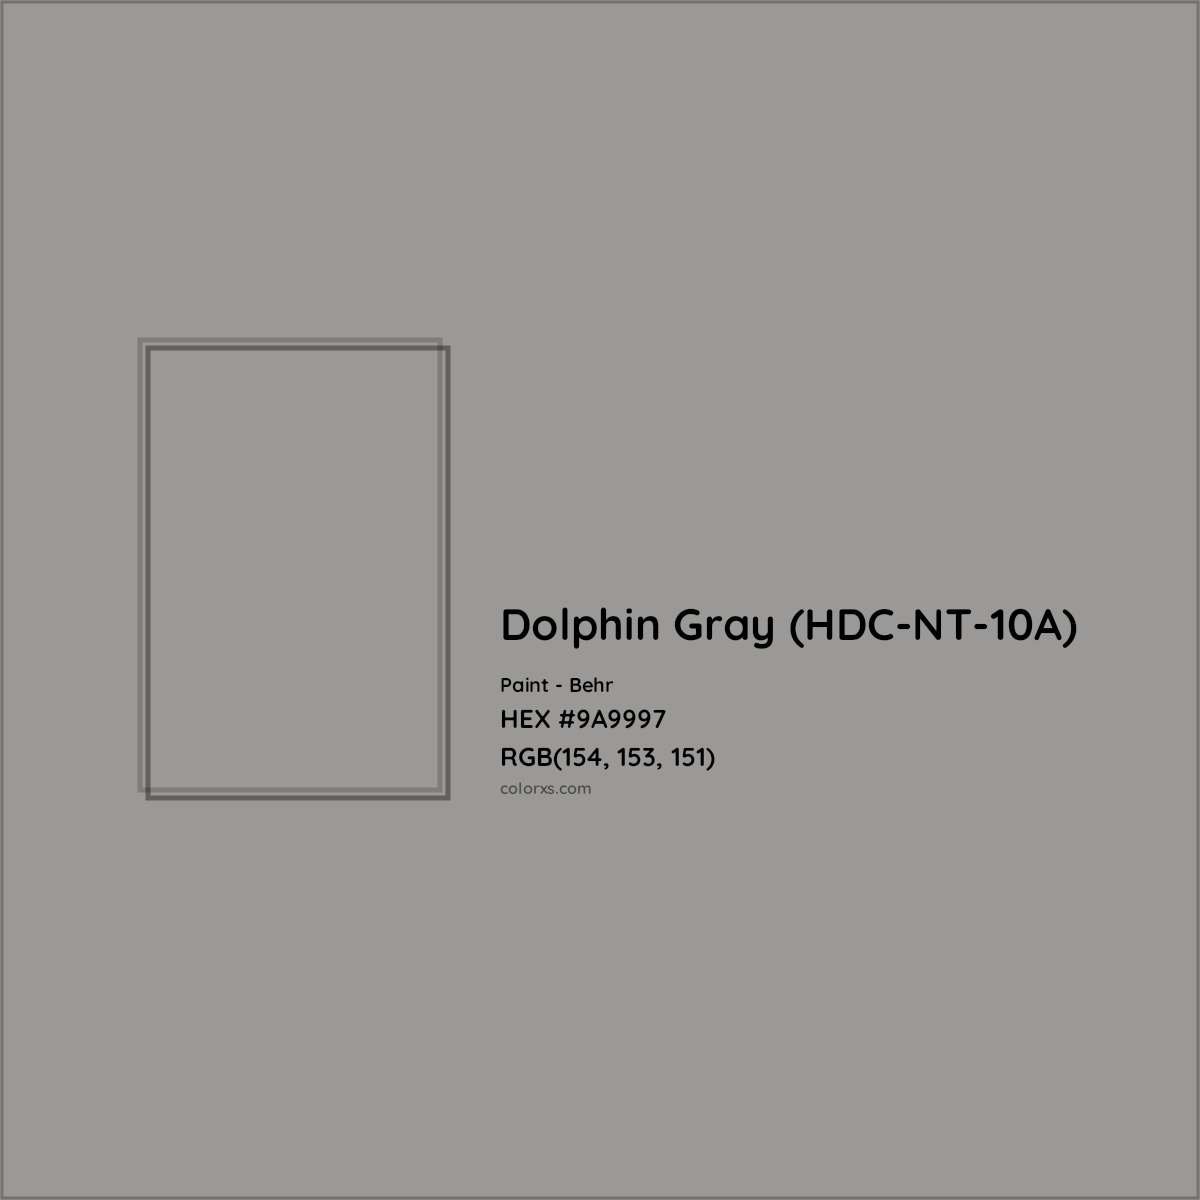 HEX #9A9997 Dolphin Gray (HDC-NT-10A) Paint Behr - Color Code